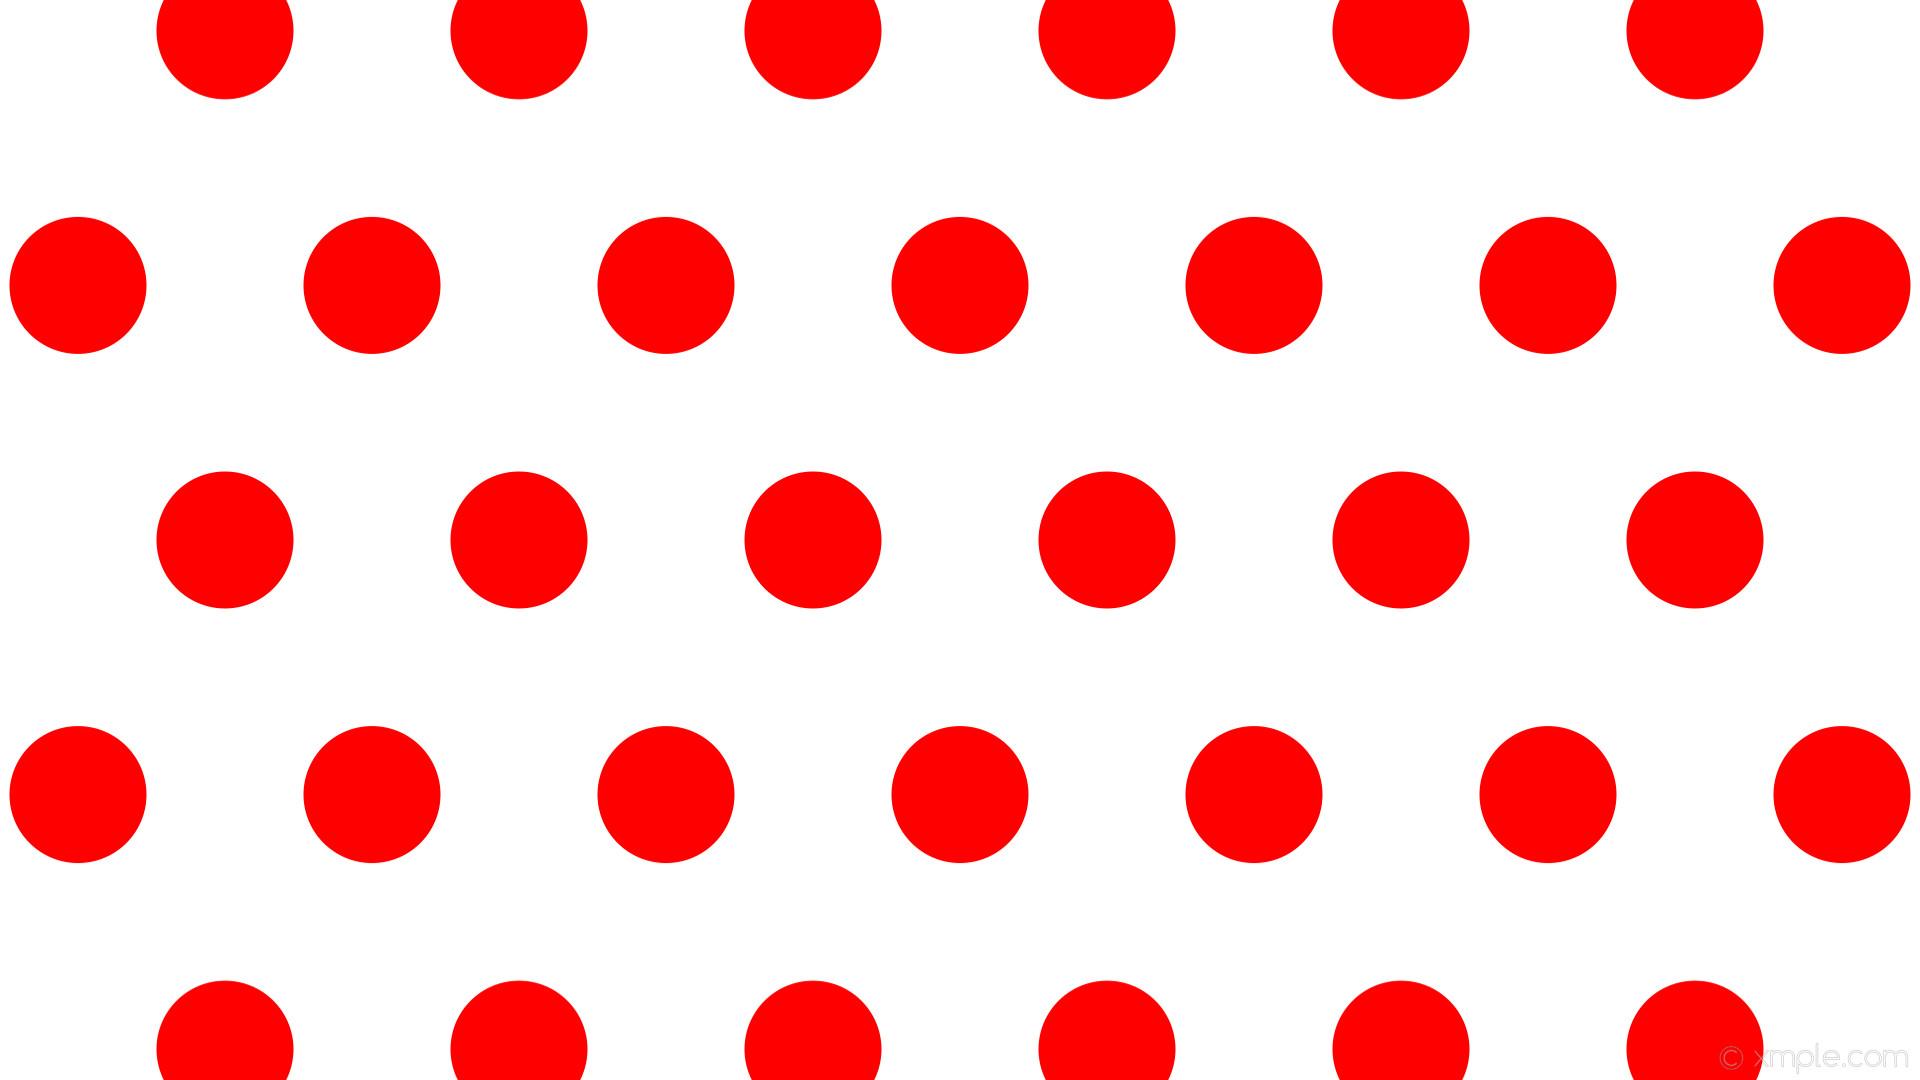 Red Polka Dot Wallpapers Top Free Red Polka Dot Backgrounds Wallpaperaccess